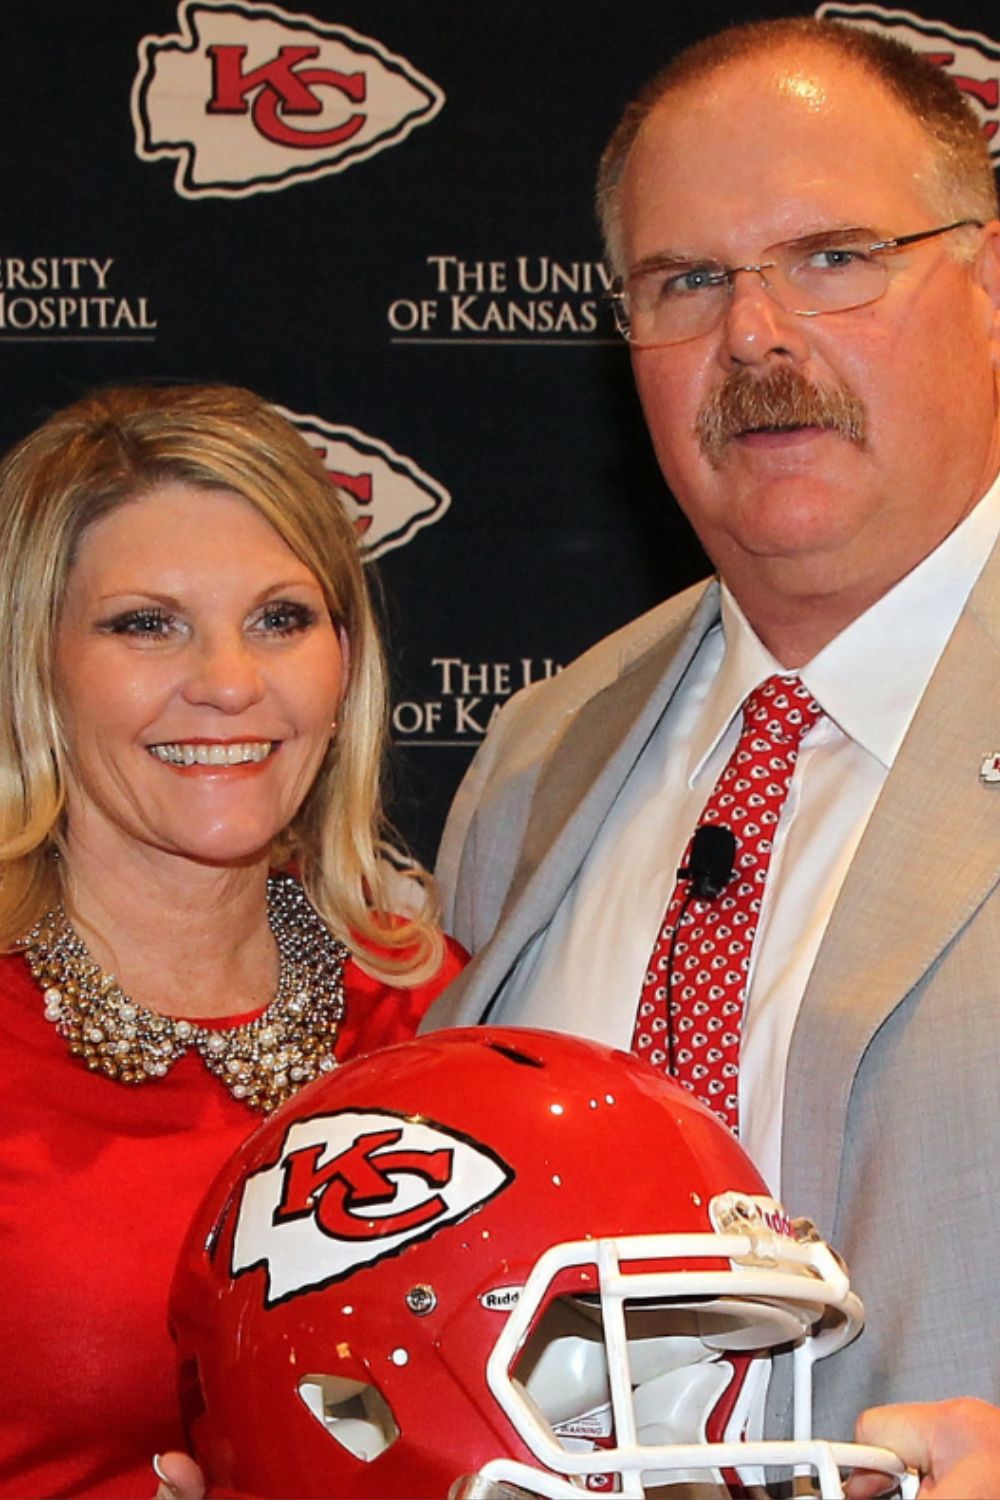 Andy Reid & Tammy Reid Were Spotted Together In One Of The Events Held By Kansas City. (Source: Fan Buzz)